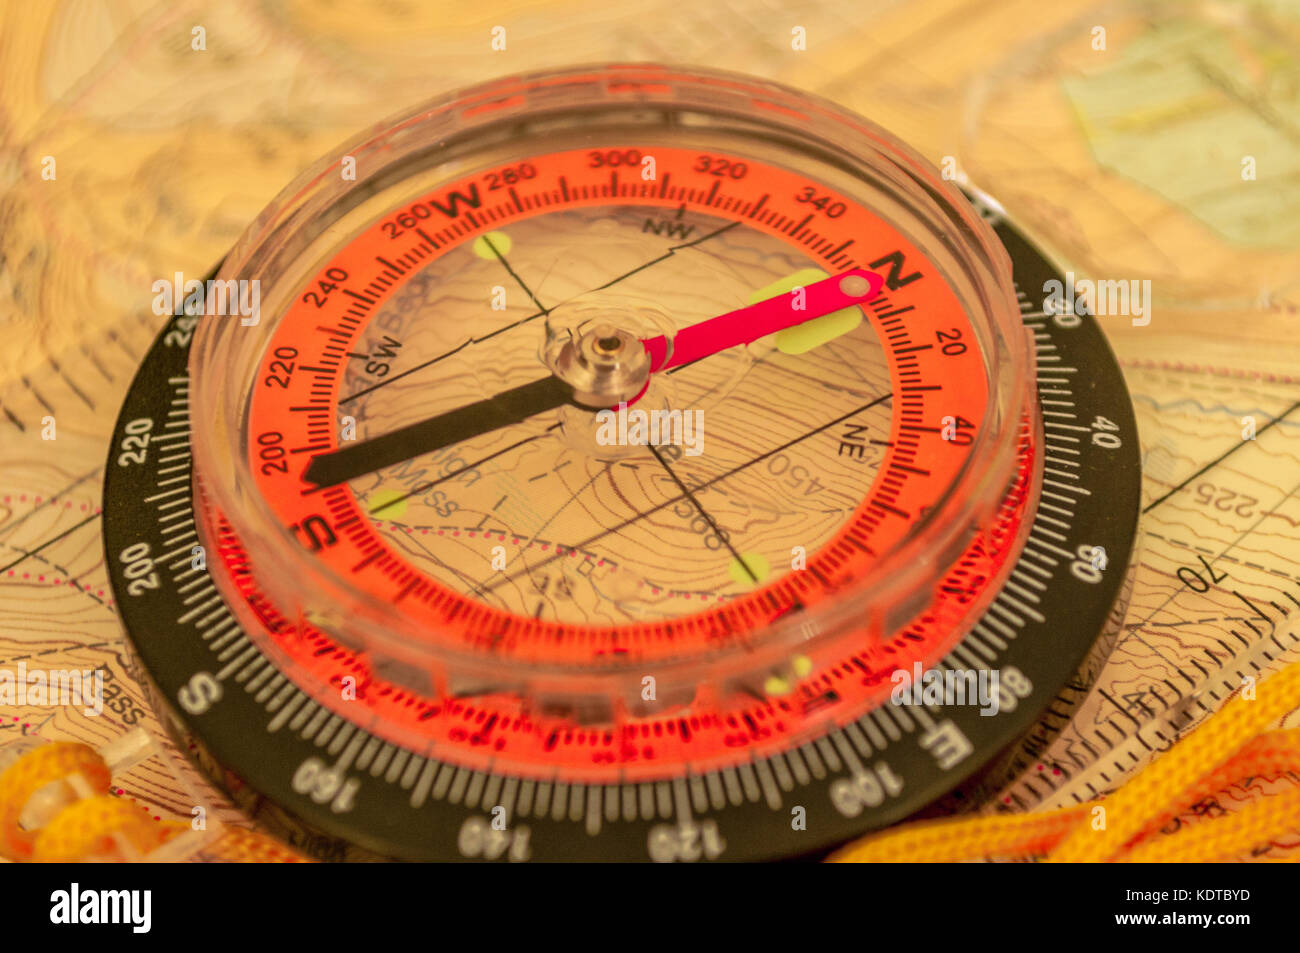 Compass showing direction on Topographic Map, Shallow Depth of Field, focus on North Stock Photo